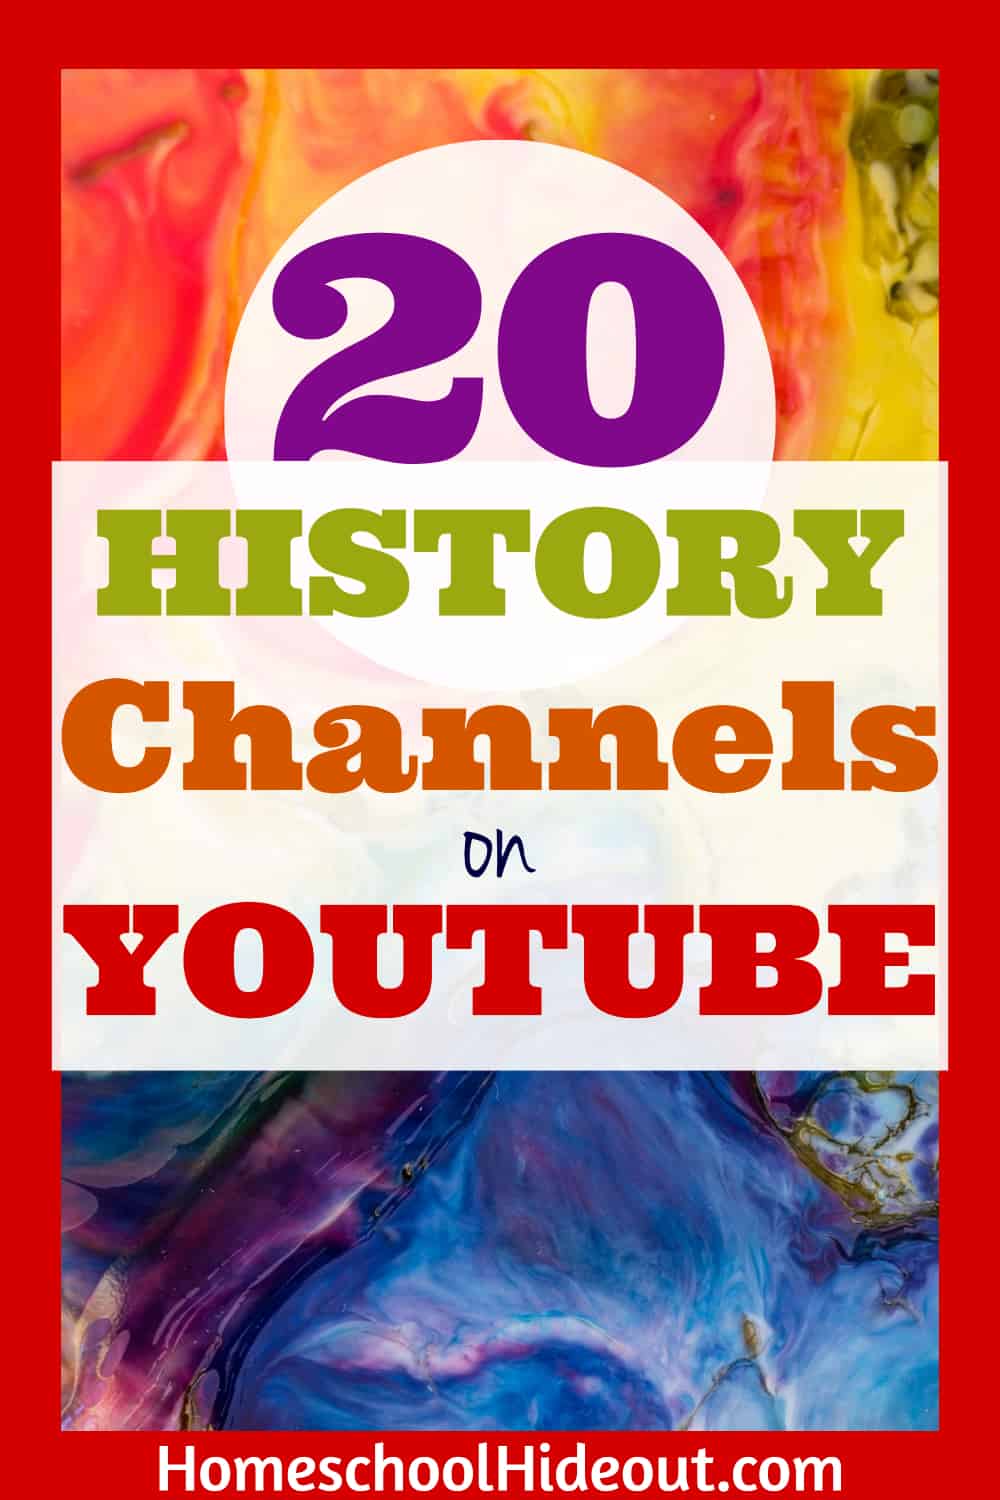 Make learning fun with educational YouTube Channels! #technology #homeschool #YouTube #homeschoolers #onlinelearning